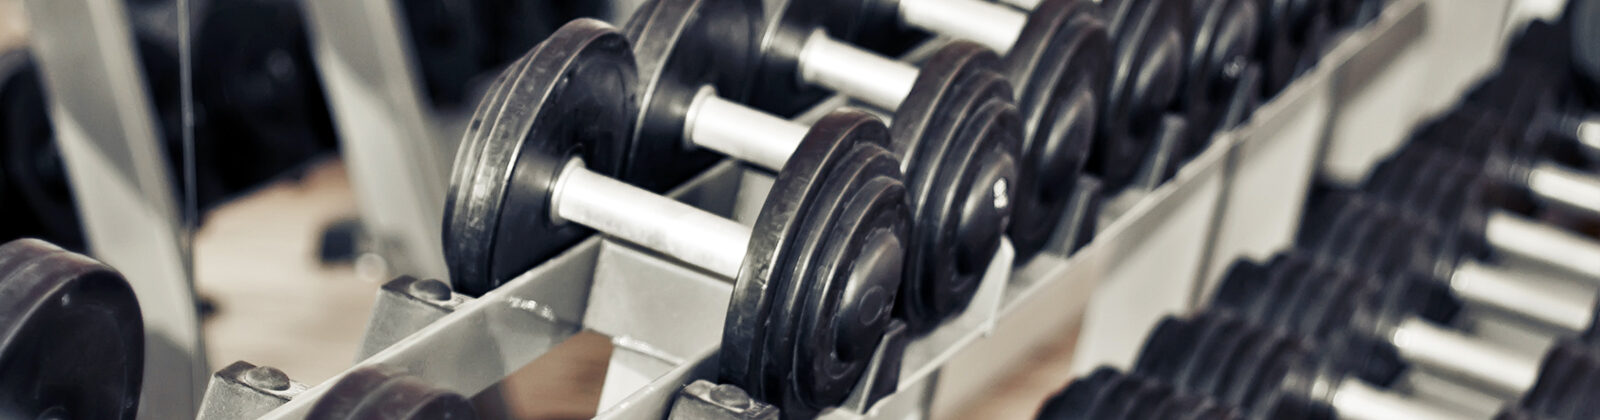 Dumbbells on a rack in a gym